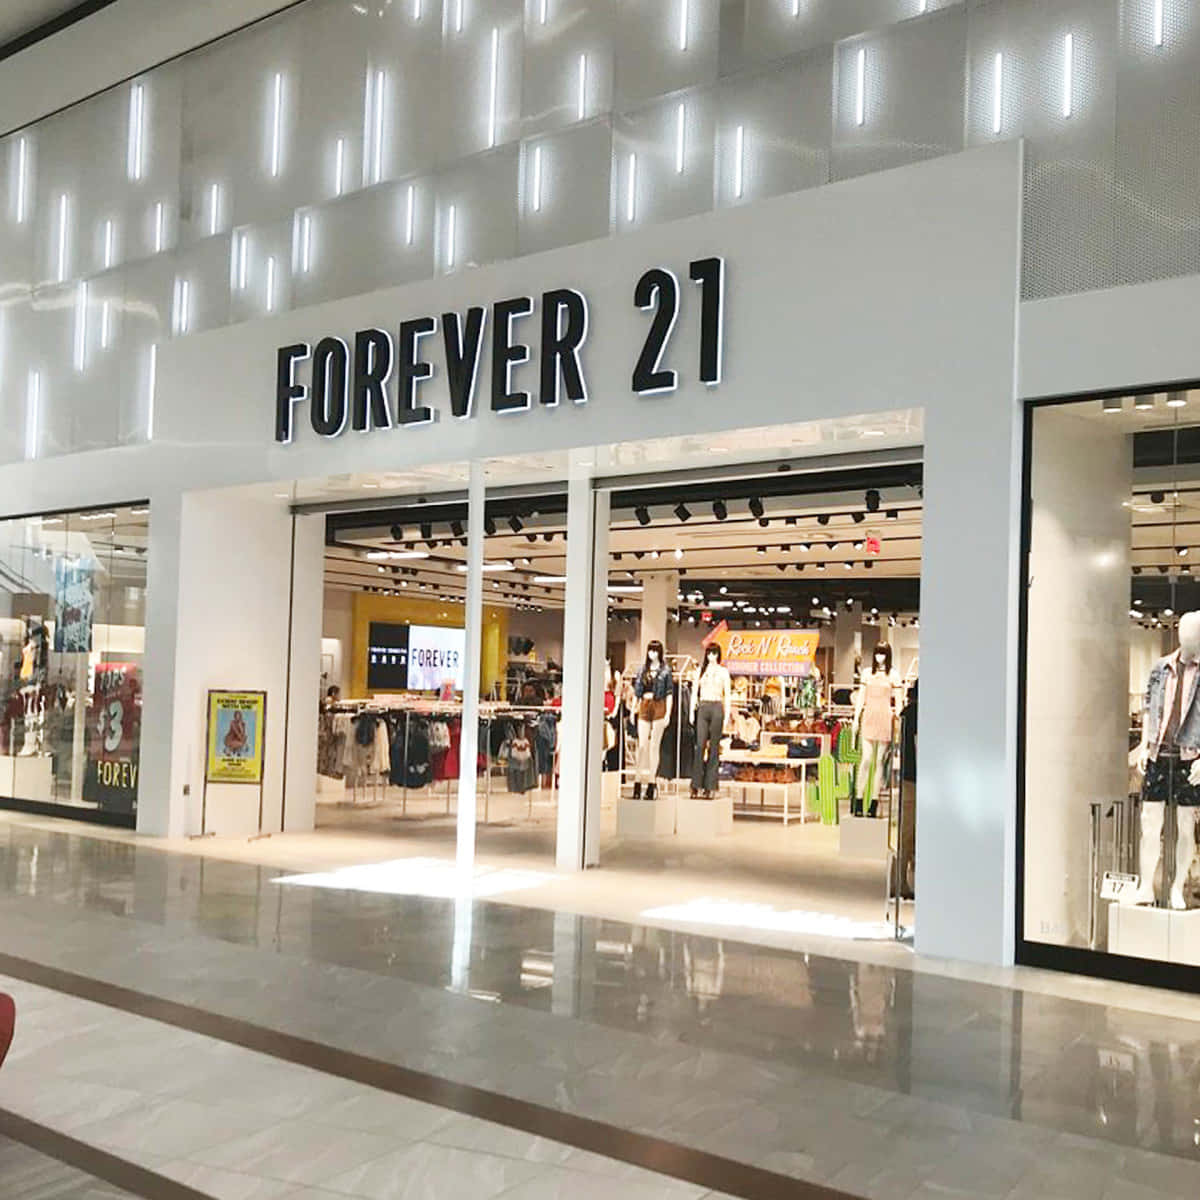 Look fashion-forward this spring with Forever 21's latest range of apparel!